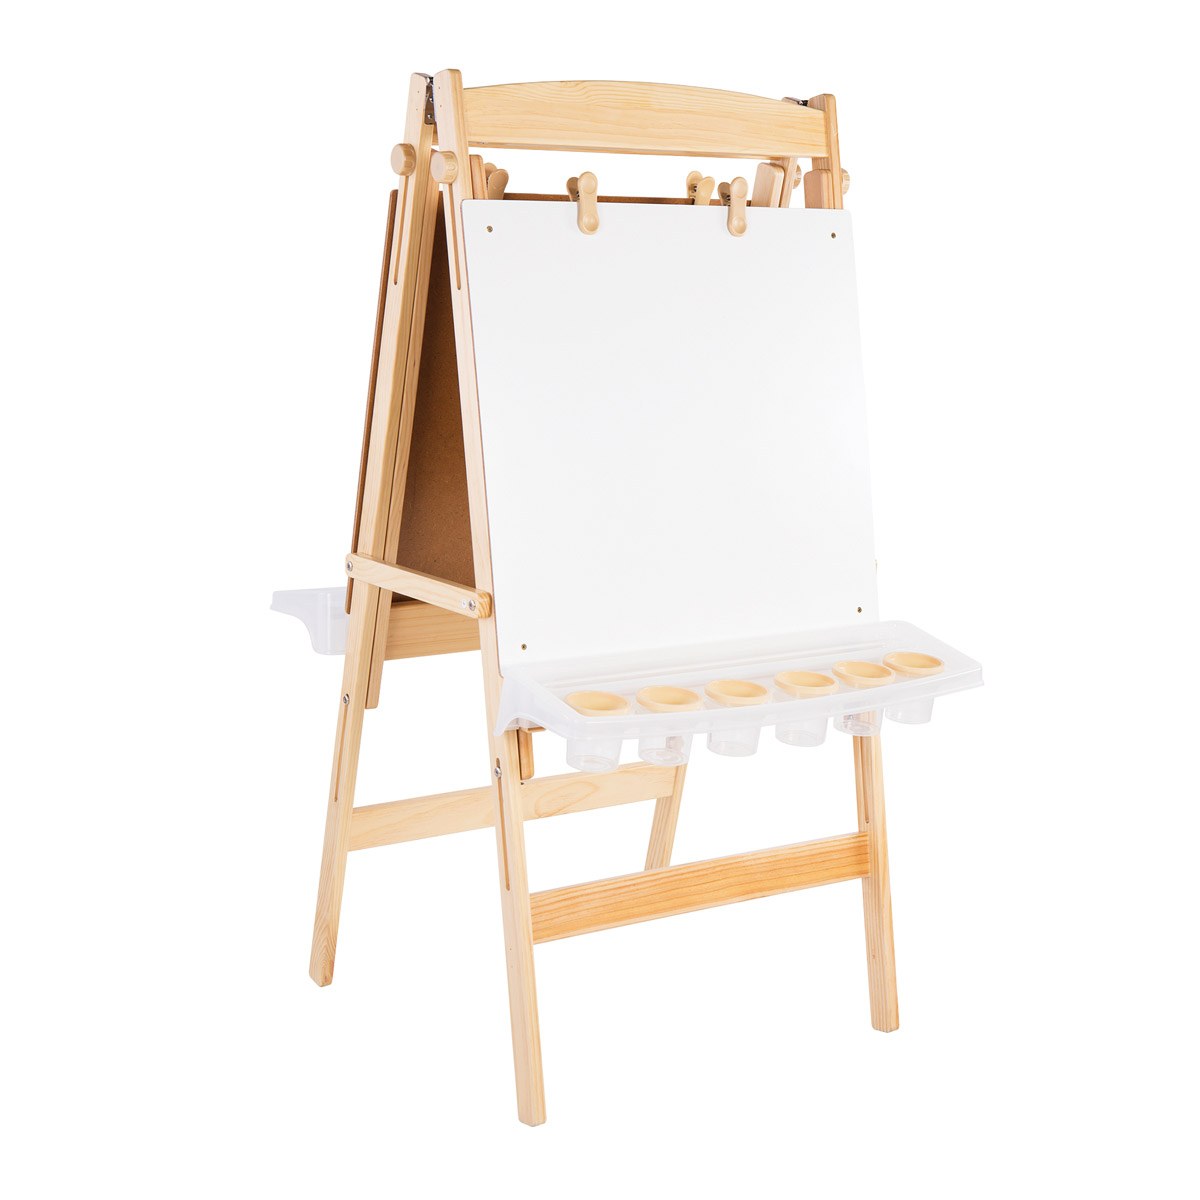 Kaplan Early Learning Company 2-Sided Adjustable Easel